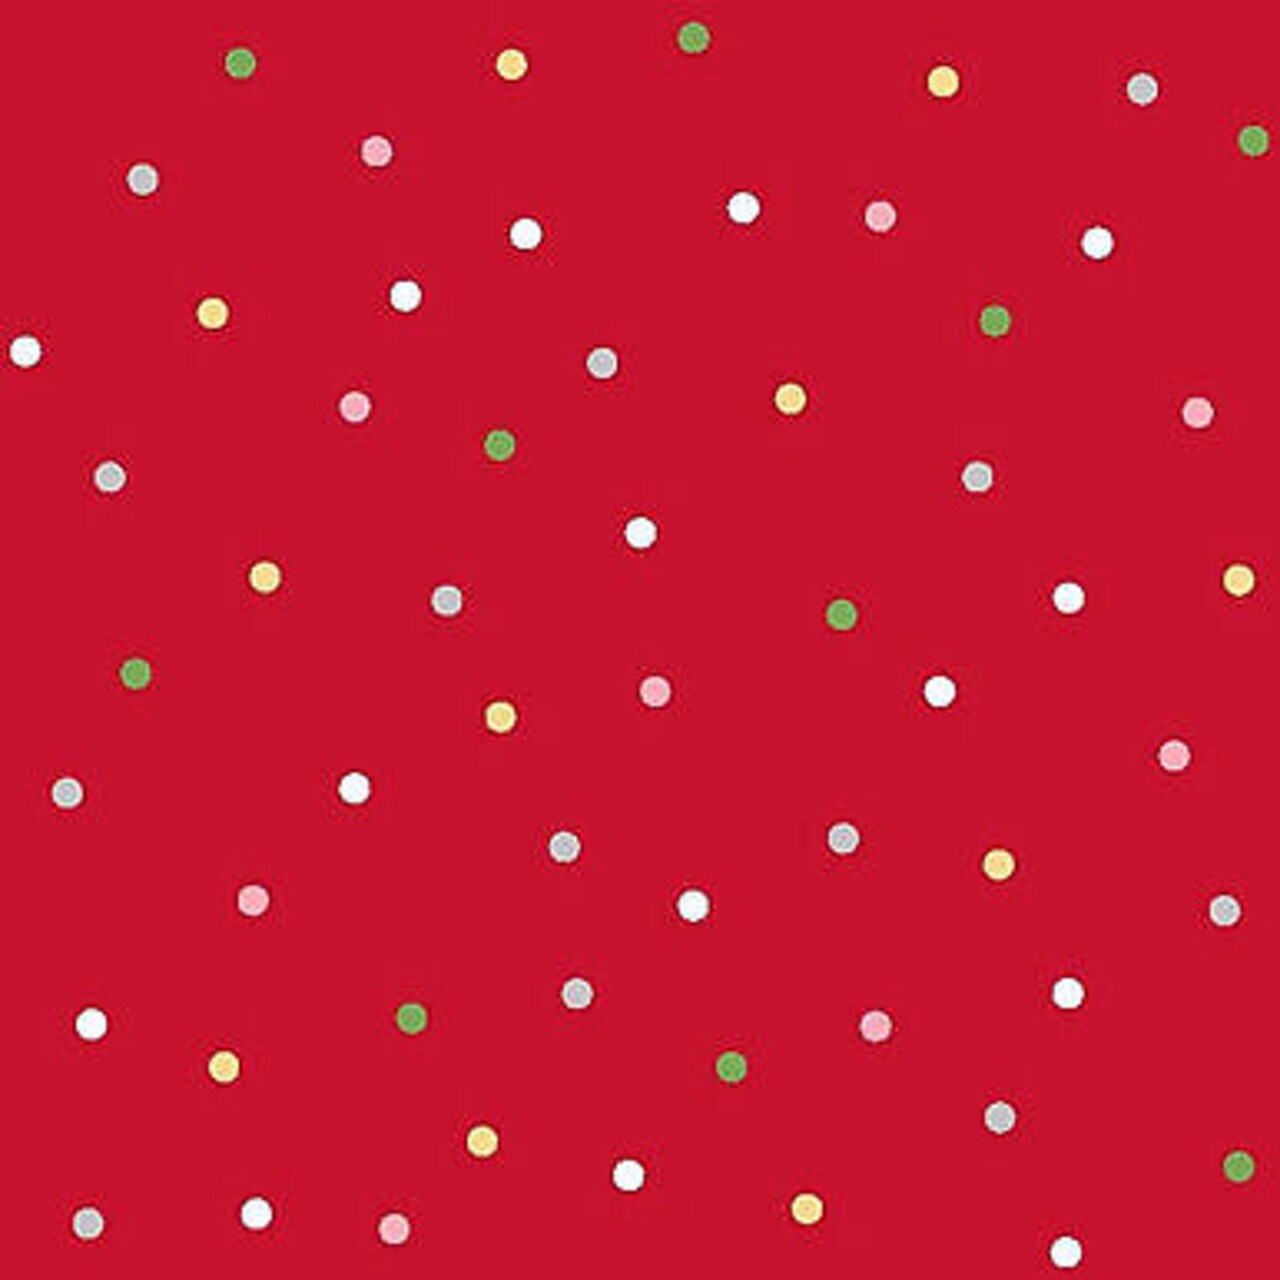 Jingle and Whisk By Maywood Studio Dots on Red Cotton Fabric  Sold by the yard